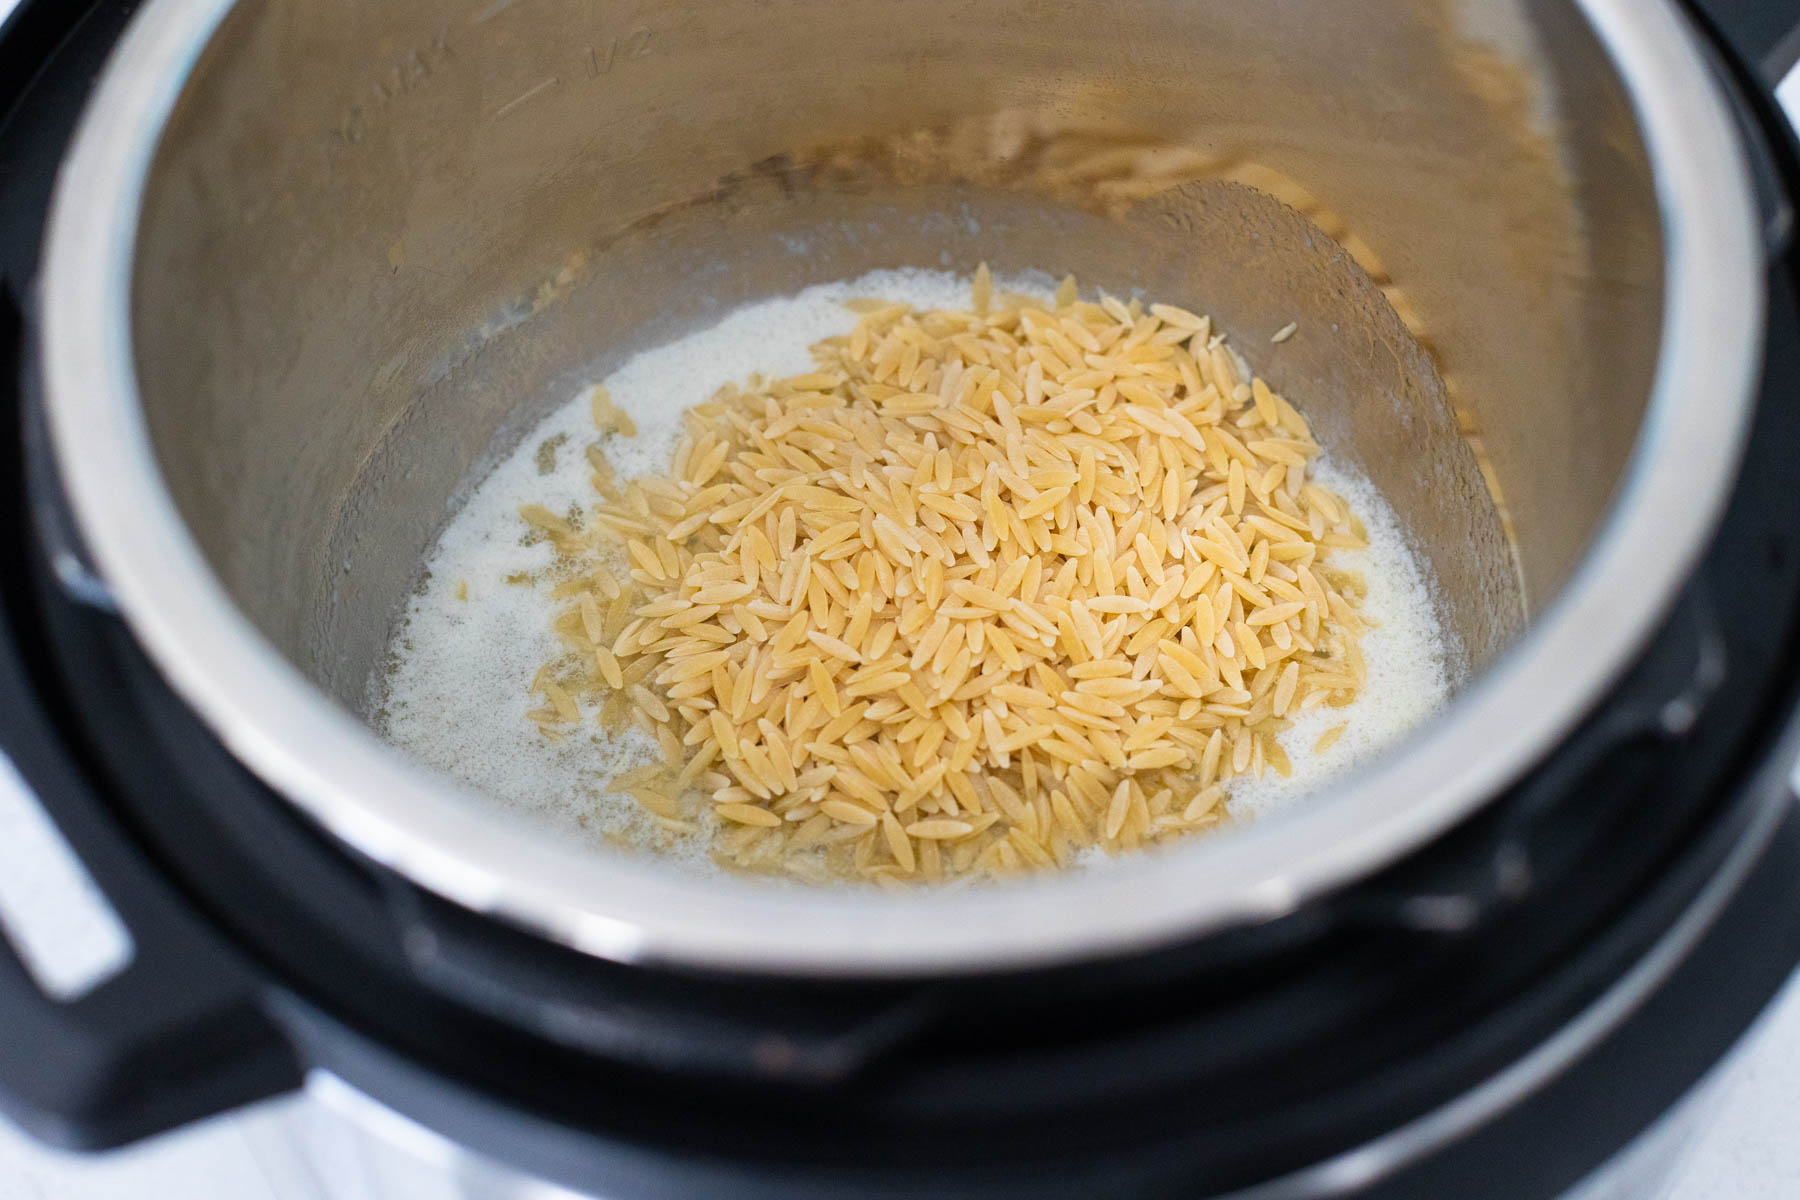 The butter has been melted in the Instant Pot and now the orzo is being stirred in.